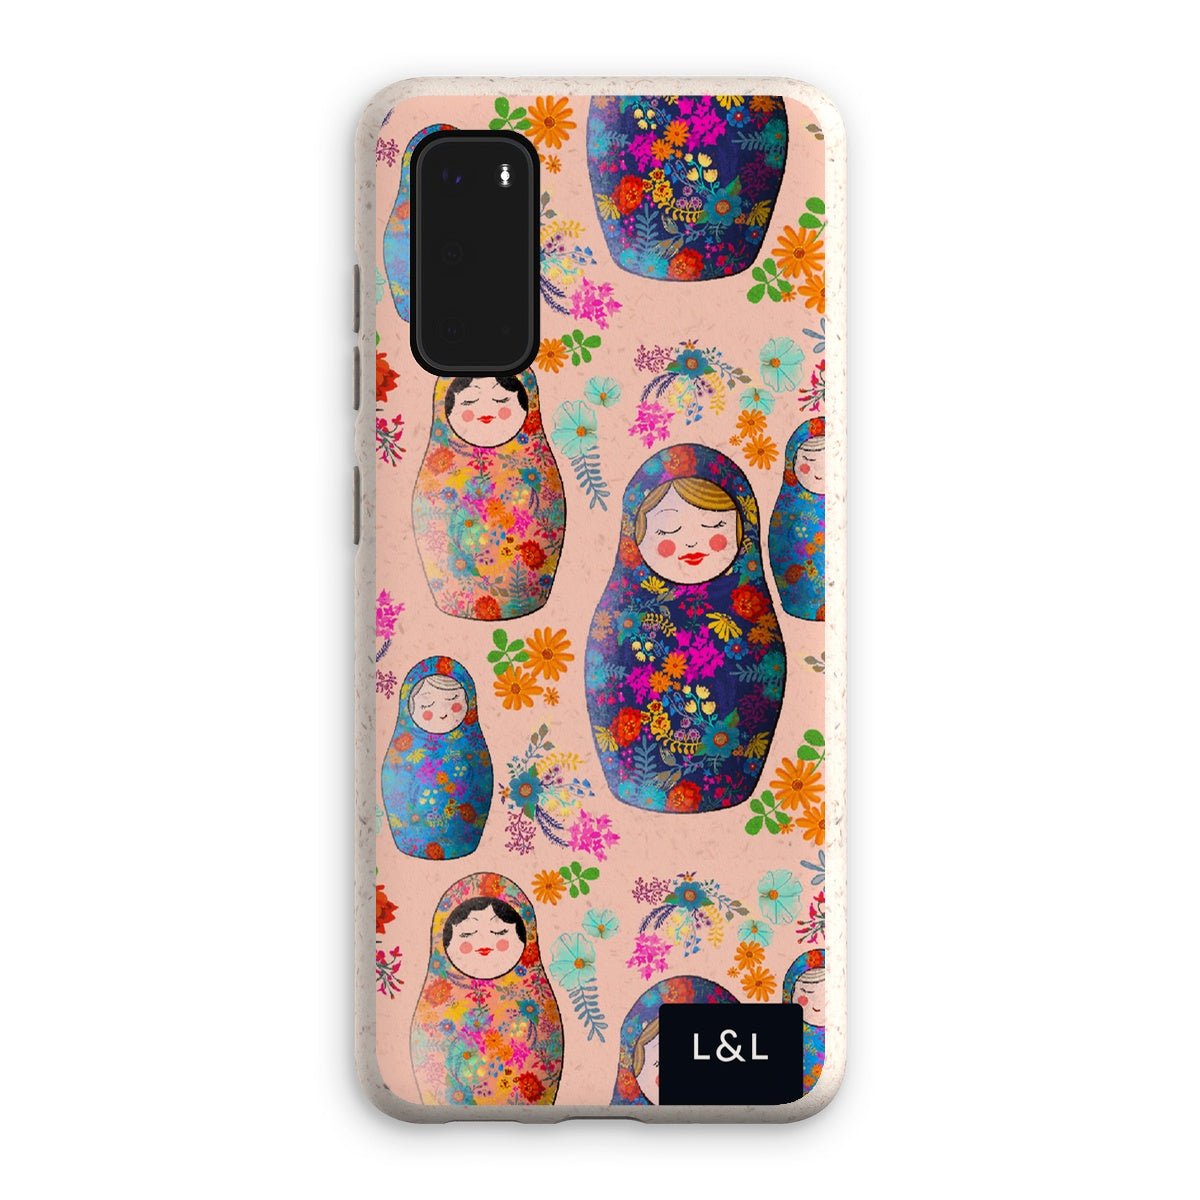 Stacking dolls Eco Phone Case - Loam & Lore